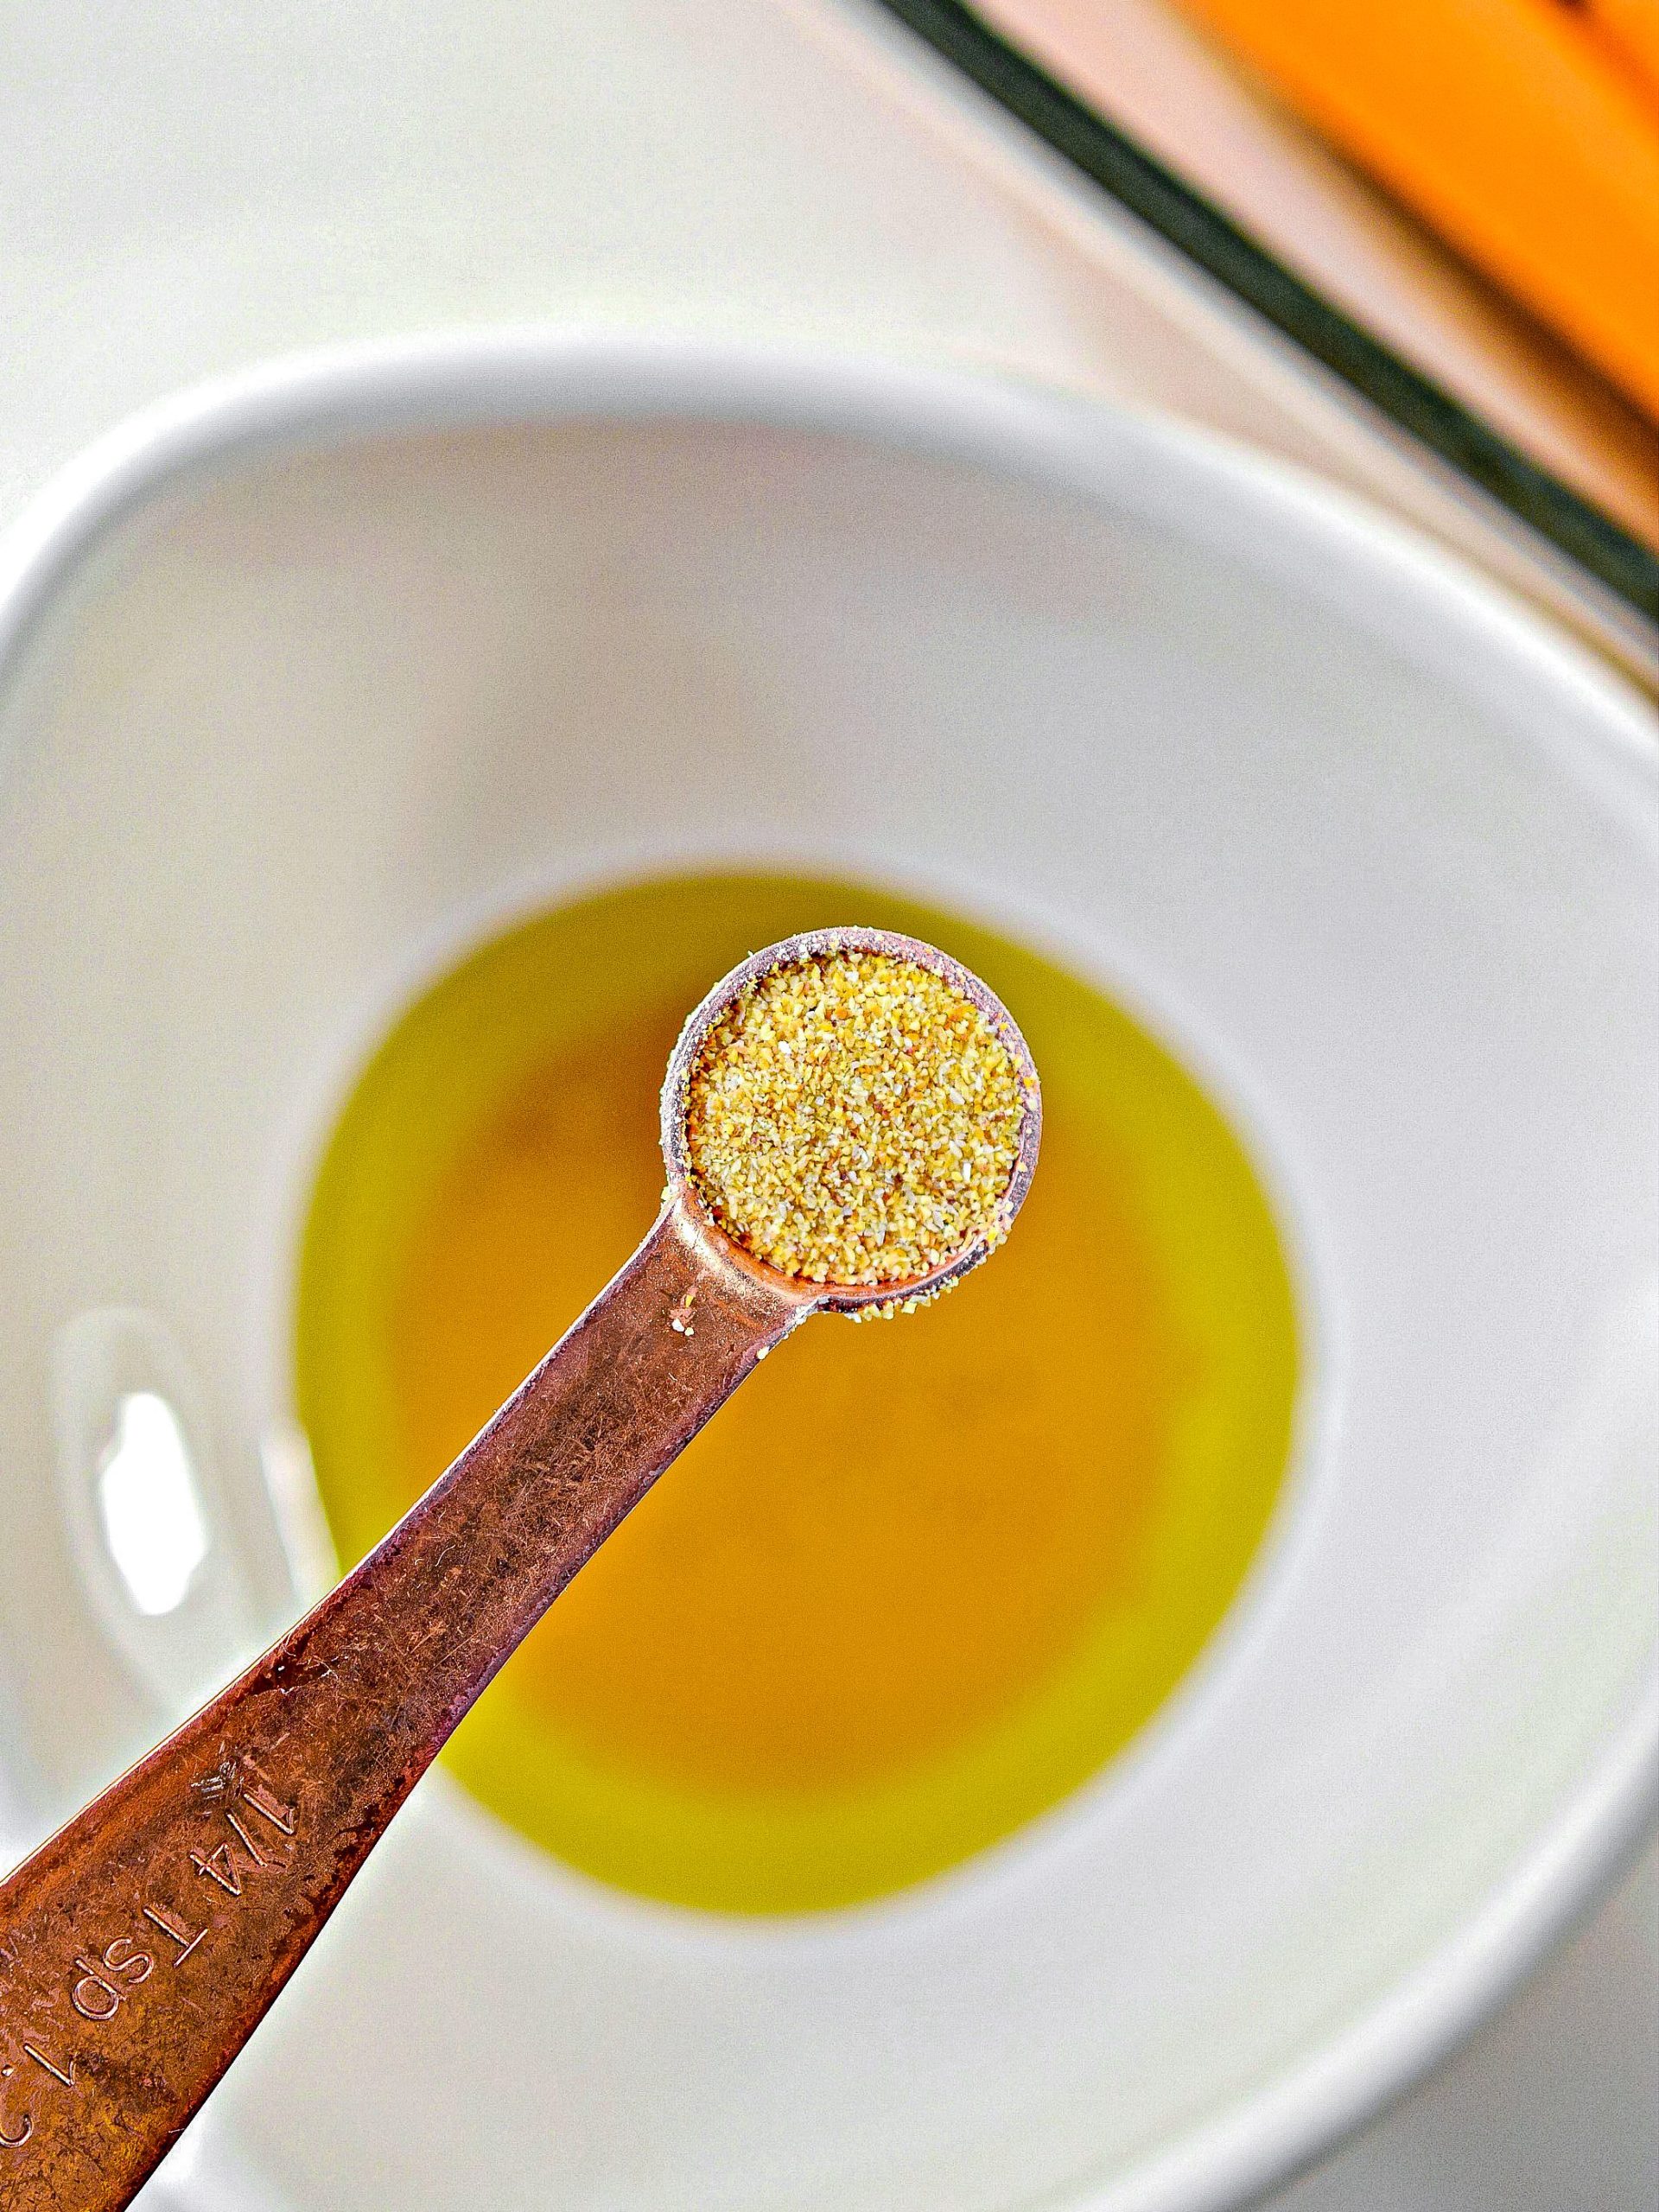 In a bowl, combine the olive oil, honey, garlic powder, and salt and pepper to taste.